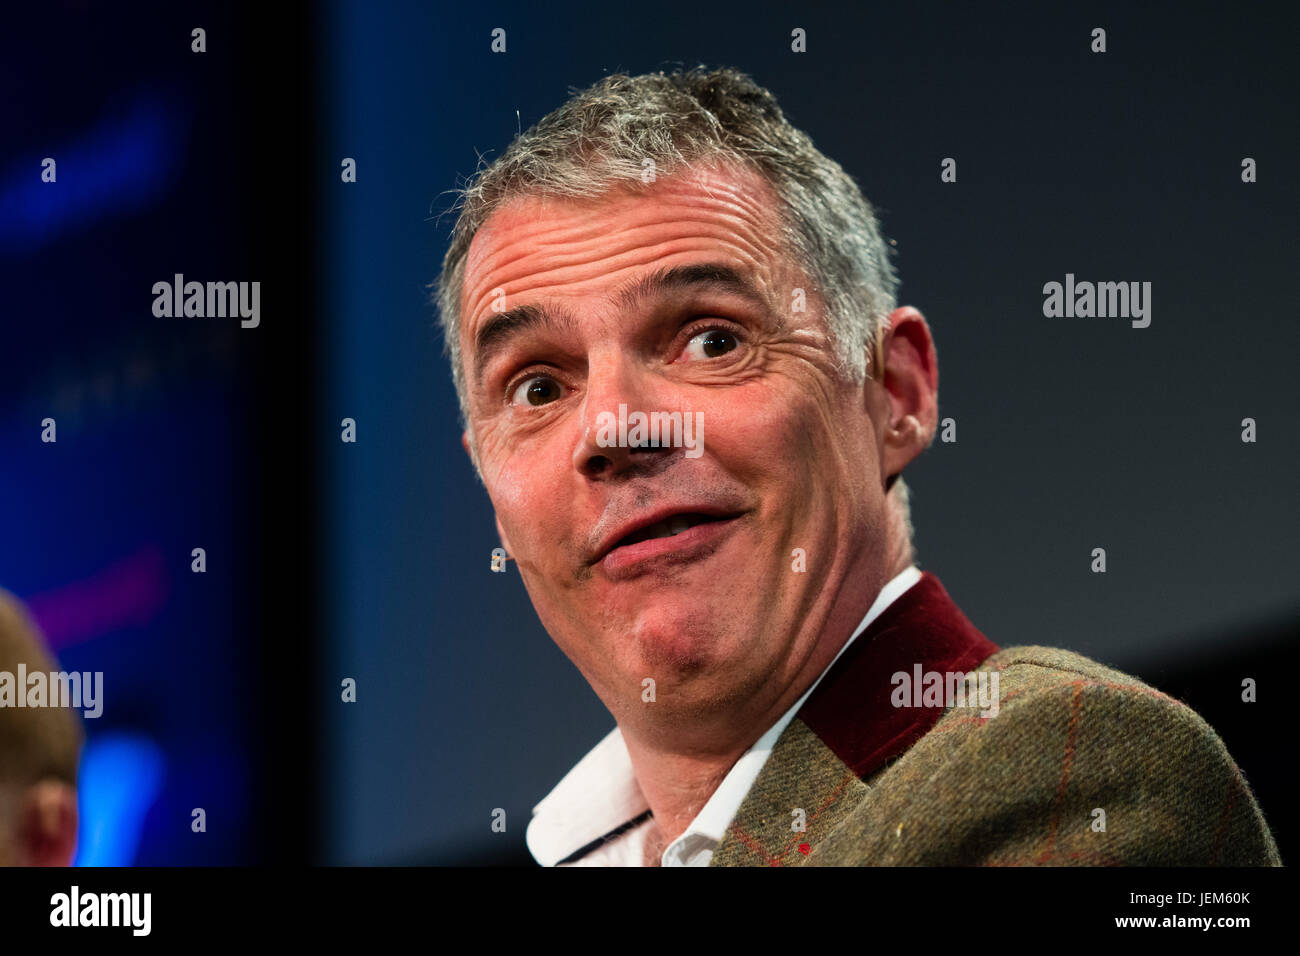 Peter Jukes, English author, screenwriter, playwright, literary critic and blogger.,   at the 2017 Hay Festival of Literature and the Arts, Hay on Wye, Wales UK Stock Photo